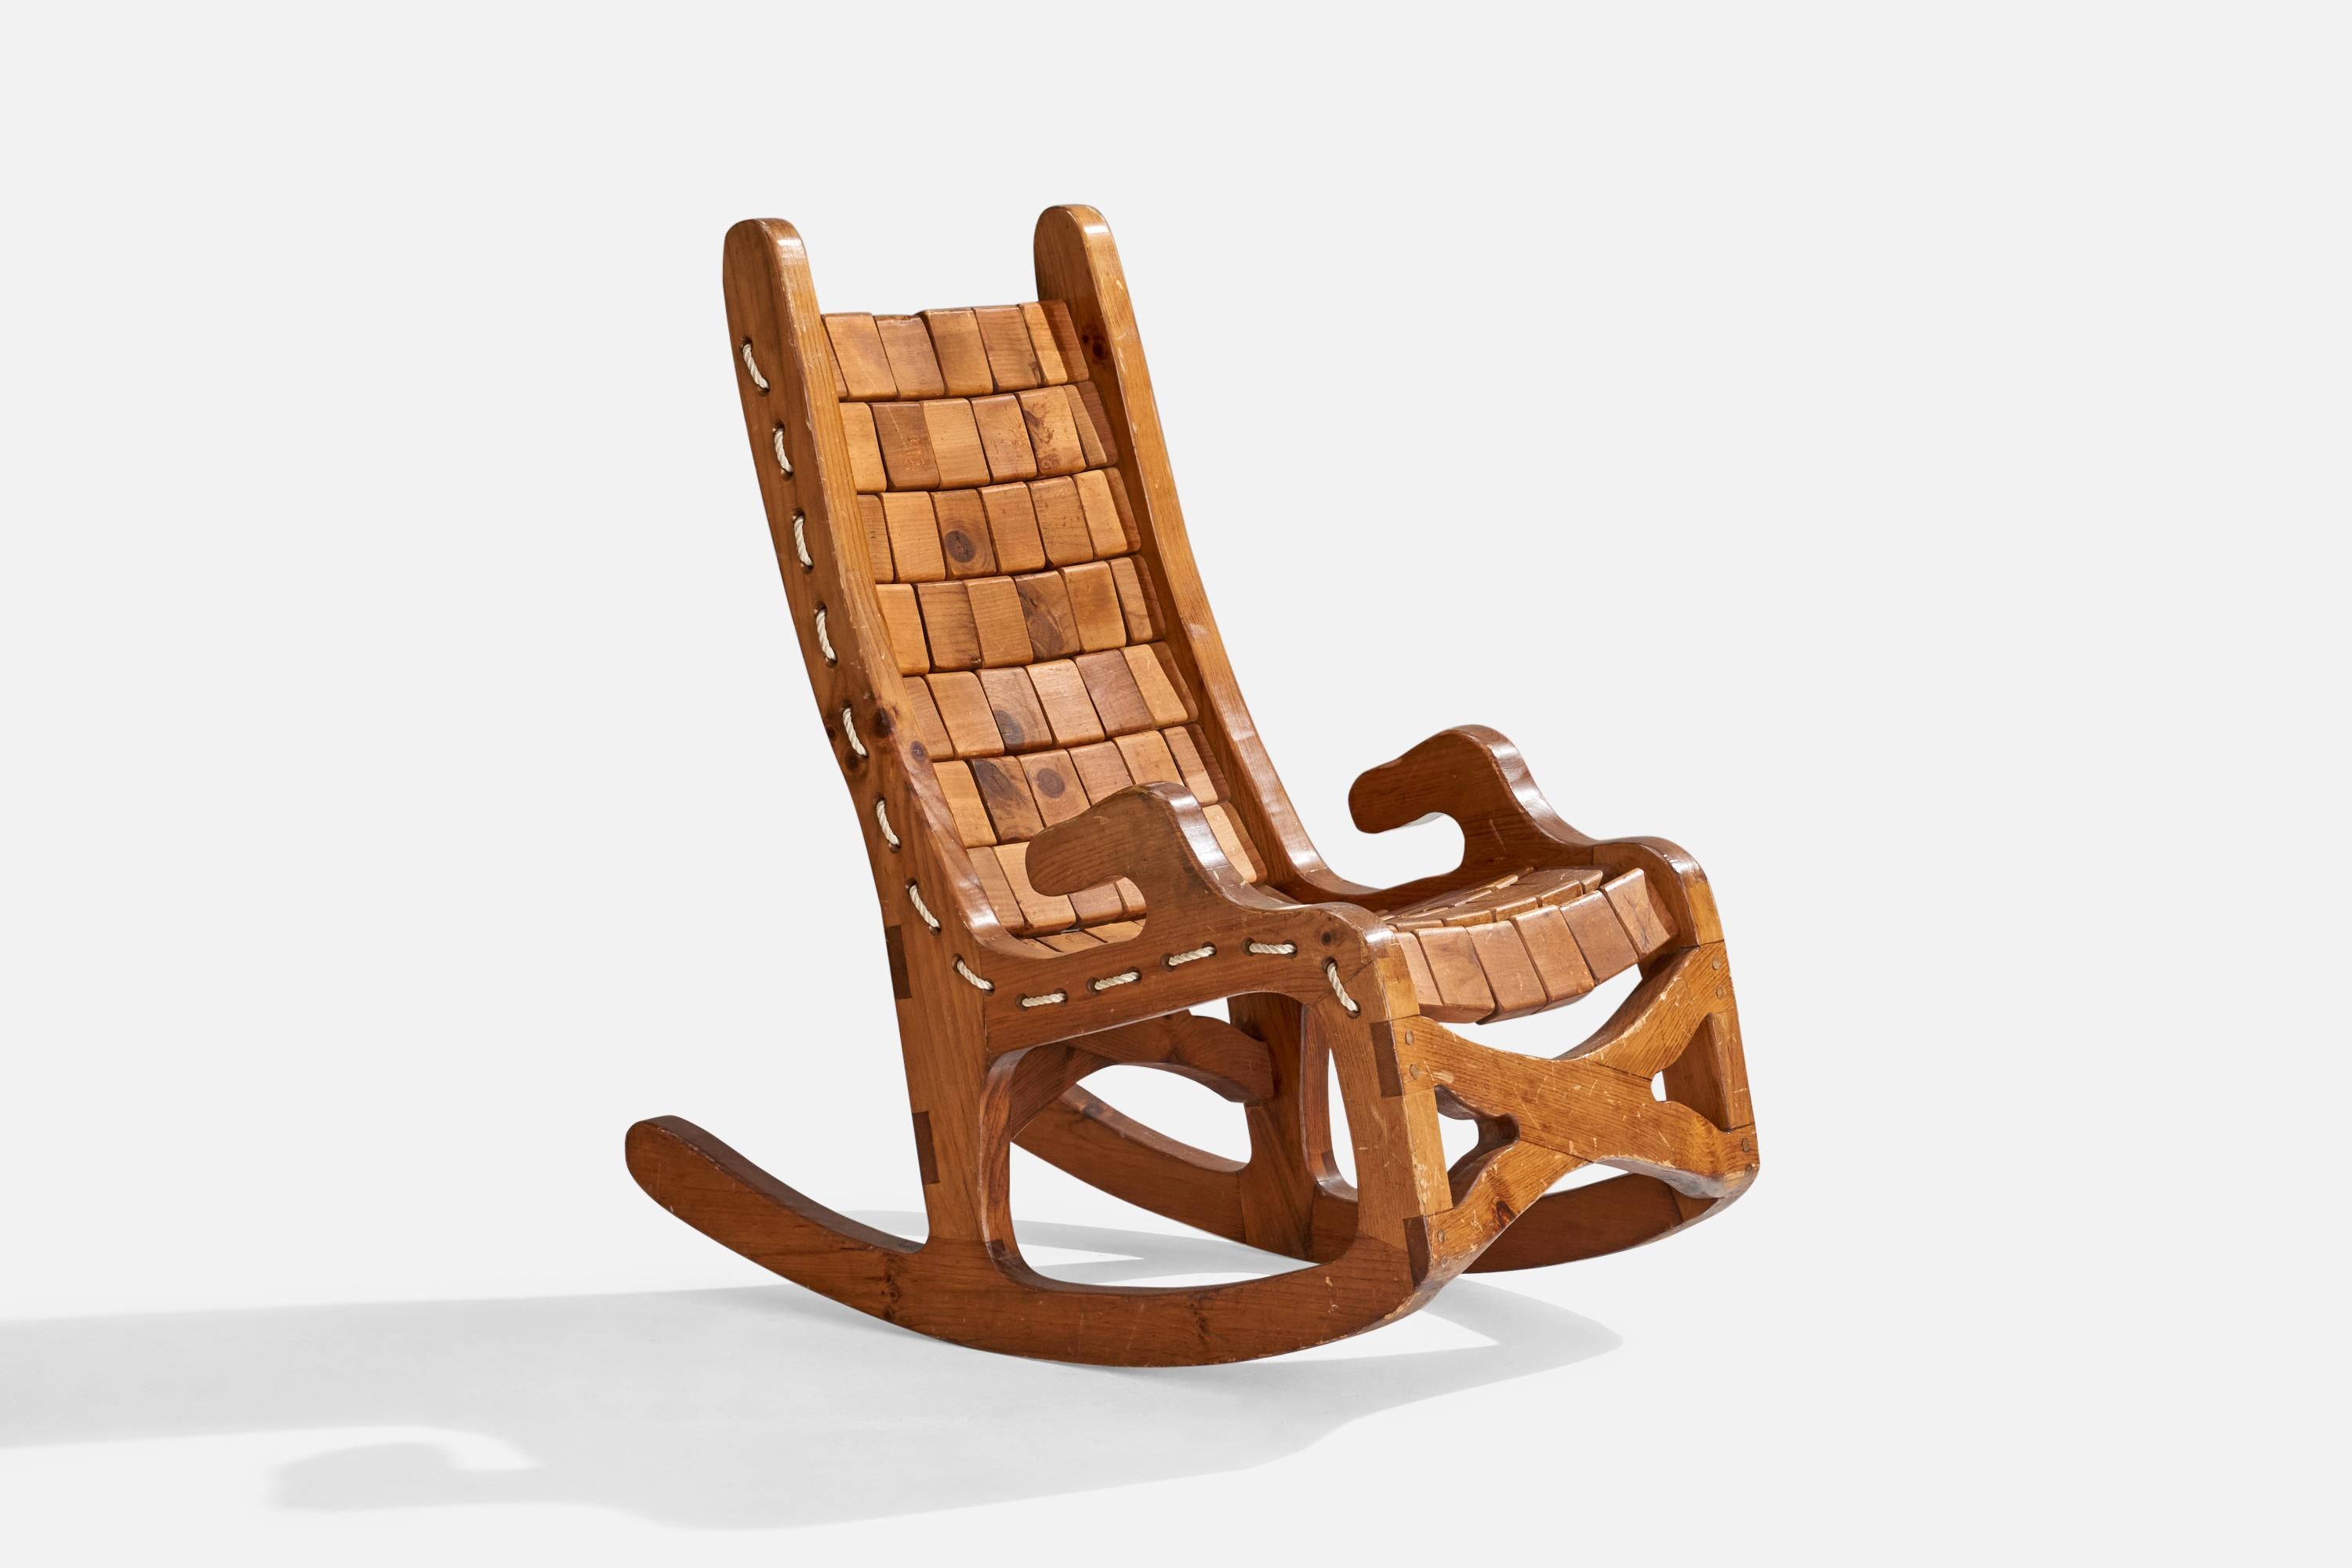 A pine and cord rocking chair designed and produced in the US, c. 1970s.

Seat height: 17.25”